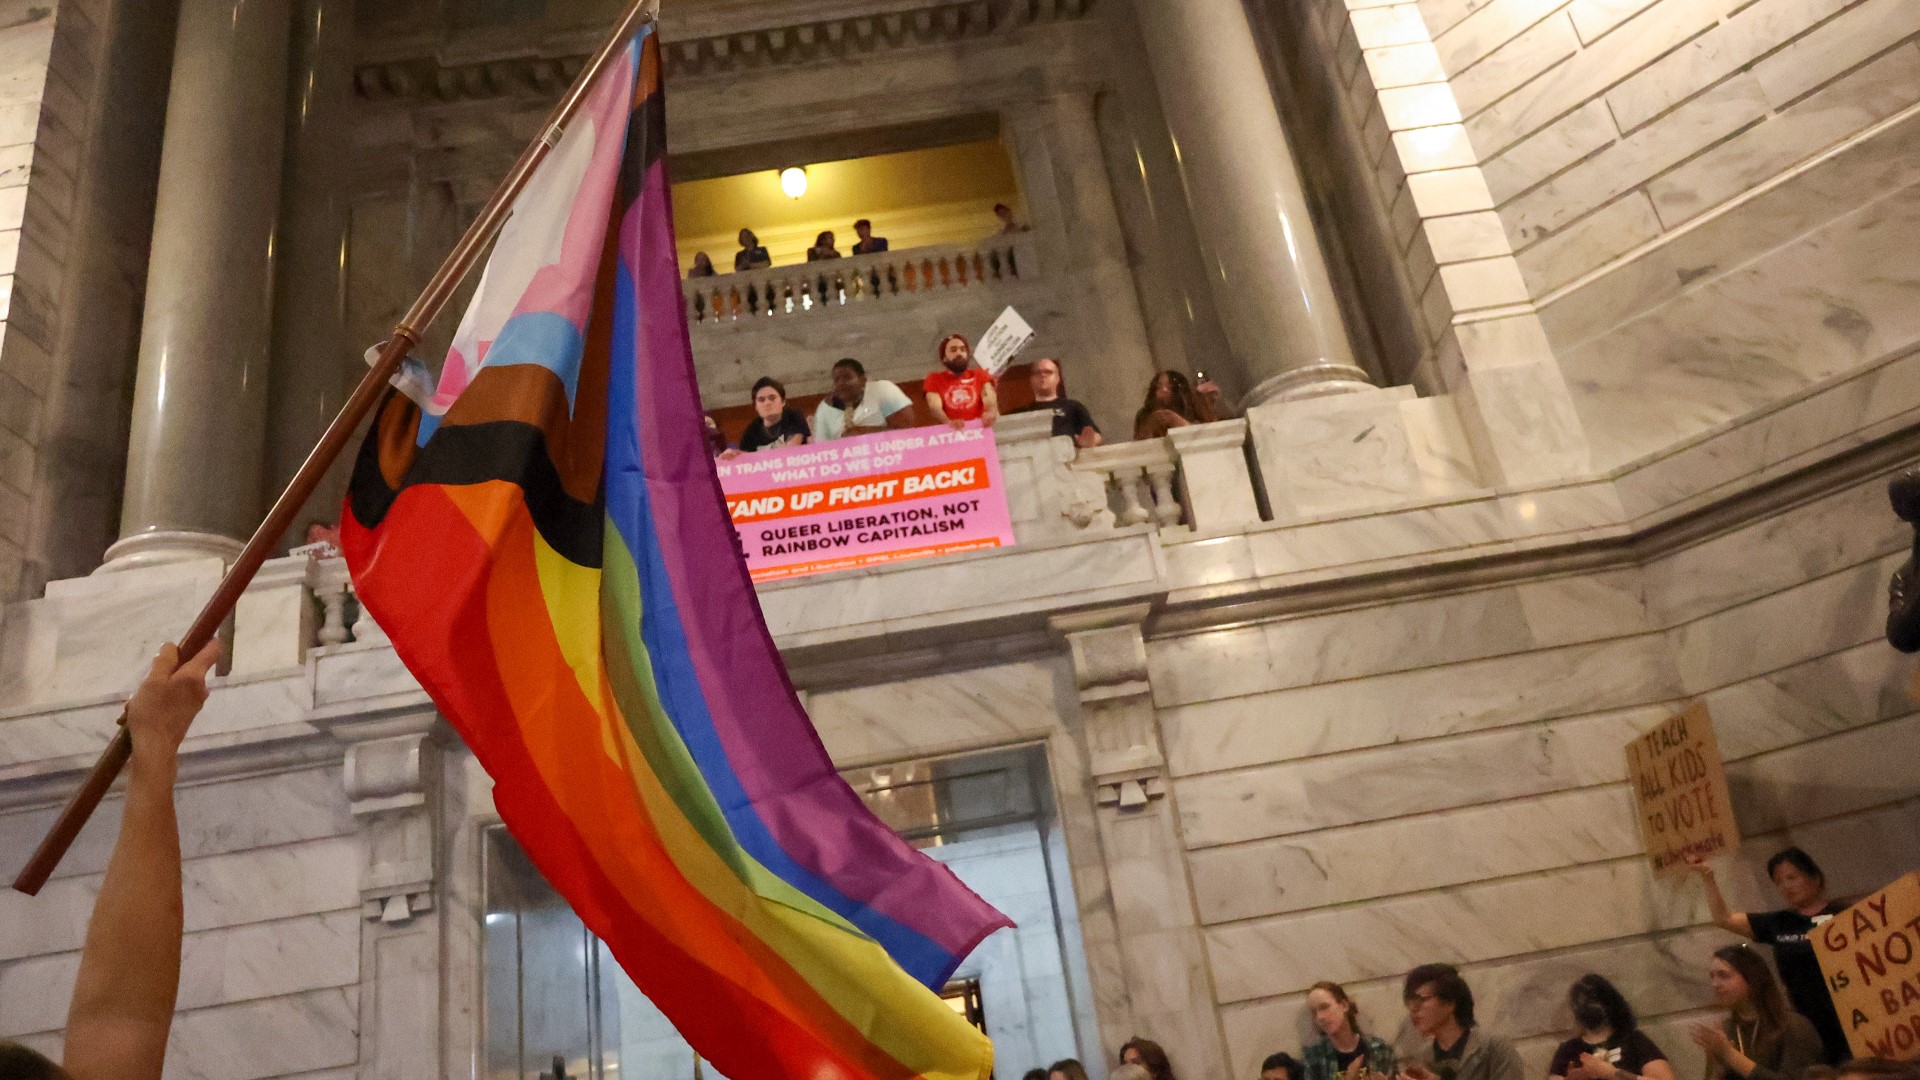 Hundreds gathered inside the rotunda demanding fairness, as lawmakers work on legislation the LGBTQ+ community calls harmful and restrictive.